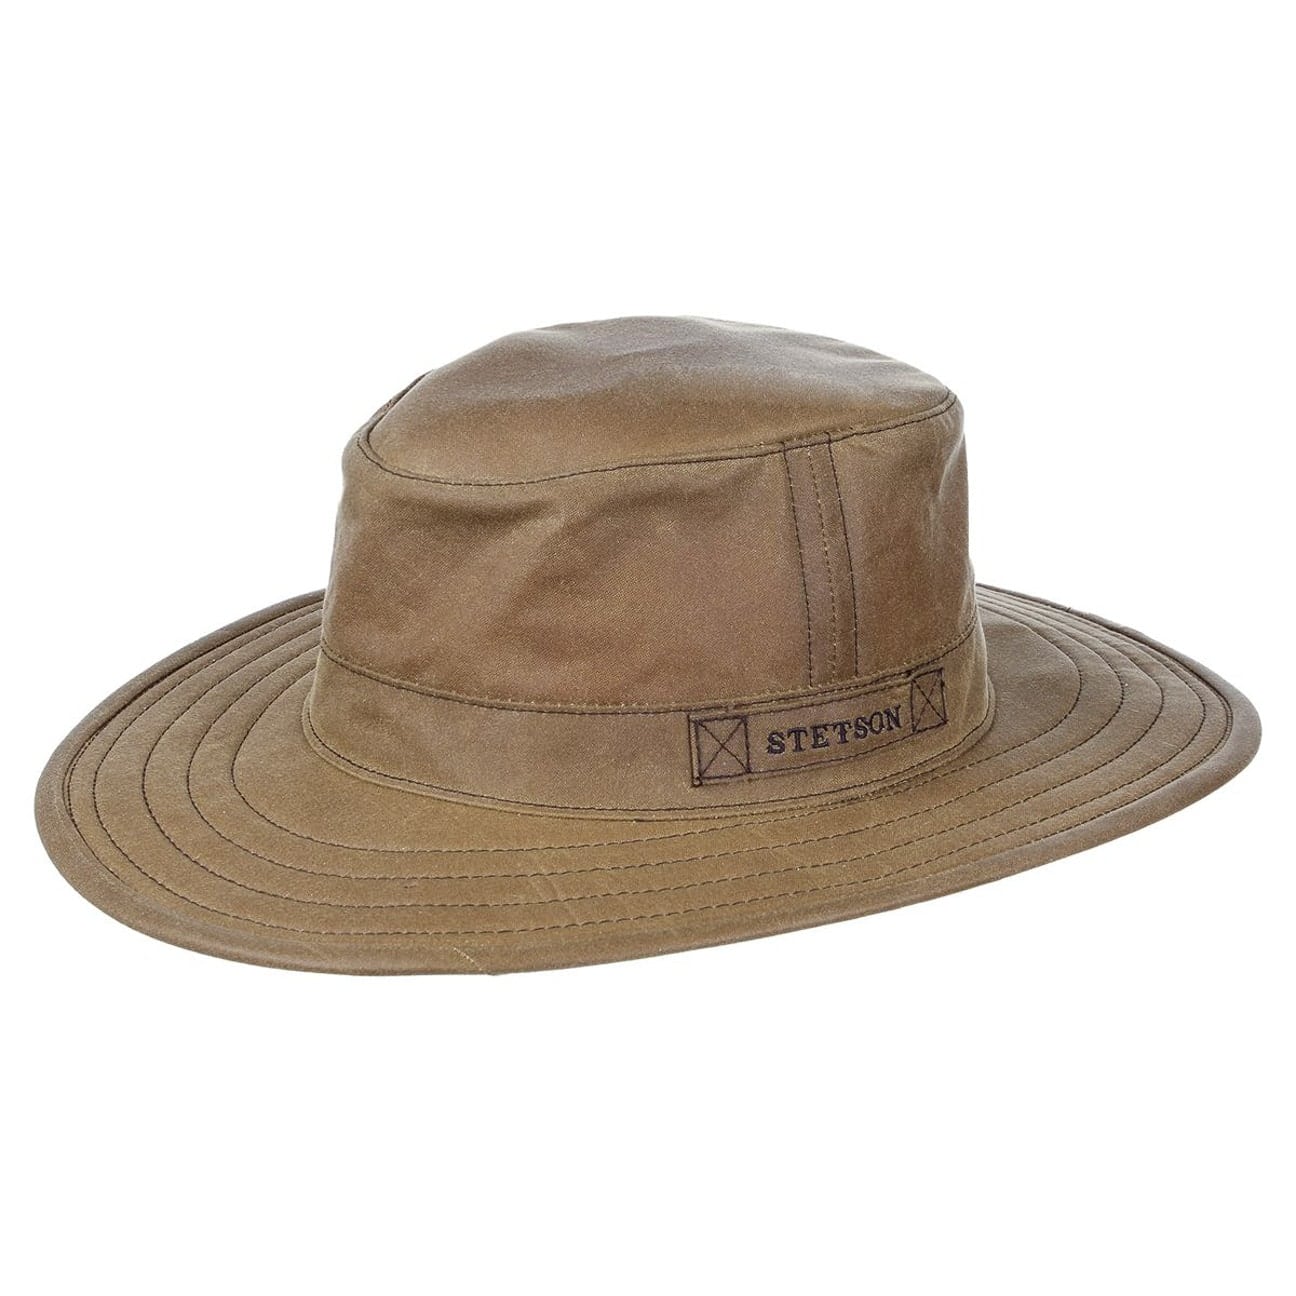 Pompano Waxed Cotton Hat by Stetson, EUR 49,00 --> Hats, caps & beanies ...